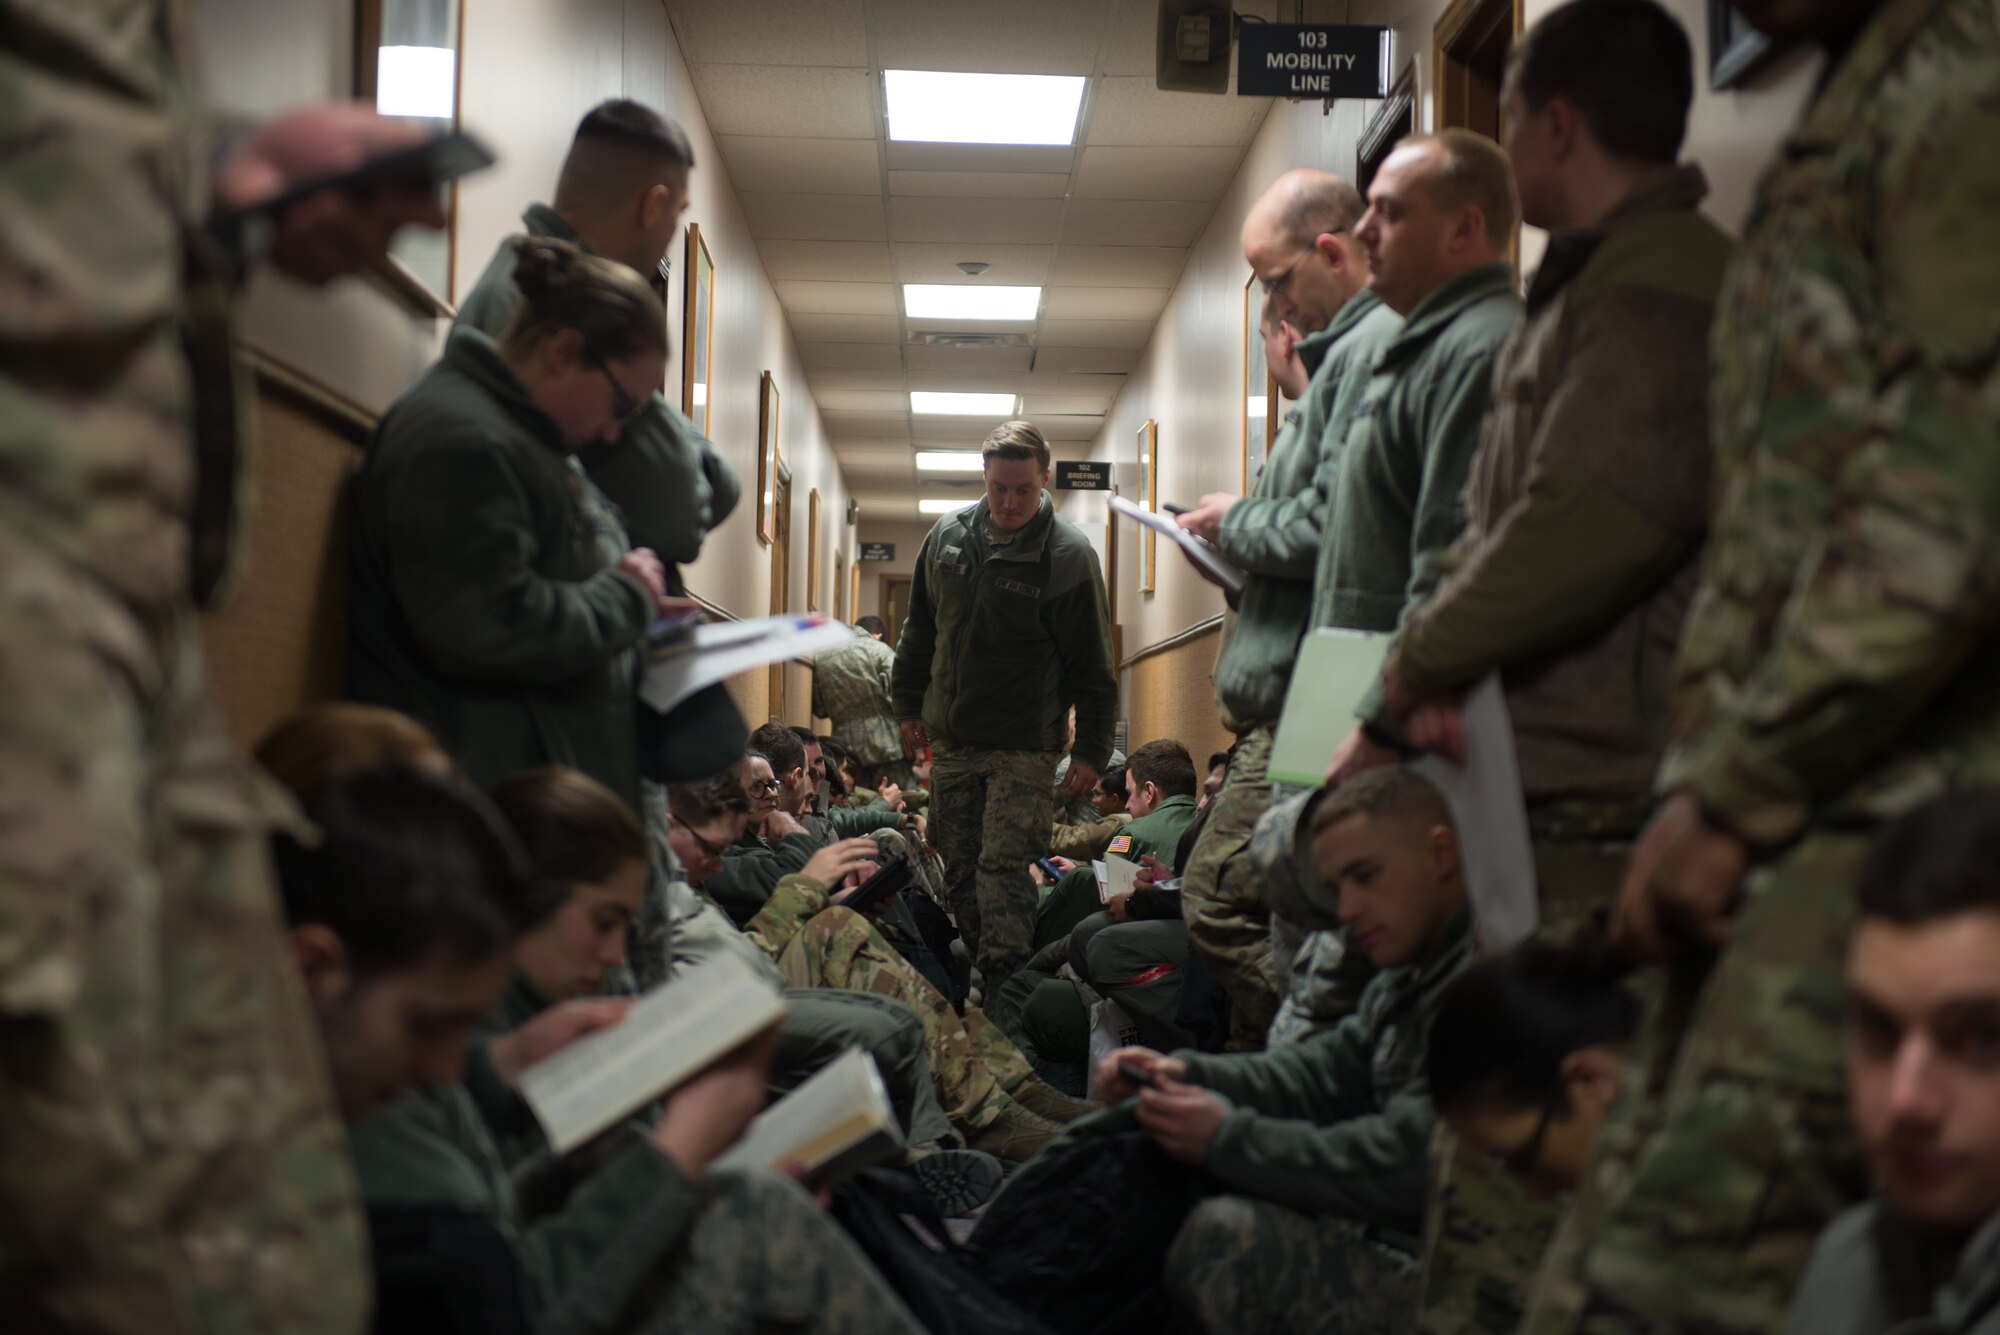 Members of Team Offutt line the walls of the Installation Deployment Readiness Cell Jan. 29, 2019, on Offutt Air Force Base, Nebraska. More than 600 members of the base took part in Phase I of Operational Readiness Exercise Winter Havoc. (U.S. Air Force photo by Tech. Sgt. Rachelle Blake)